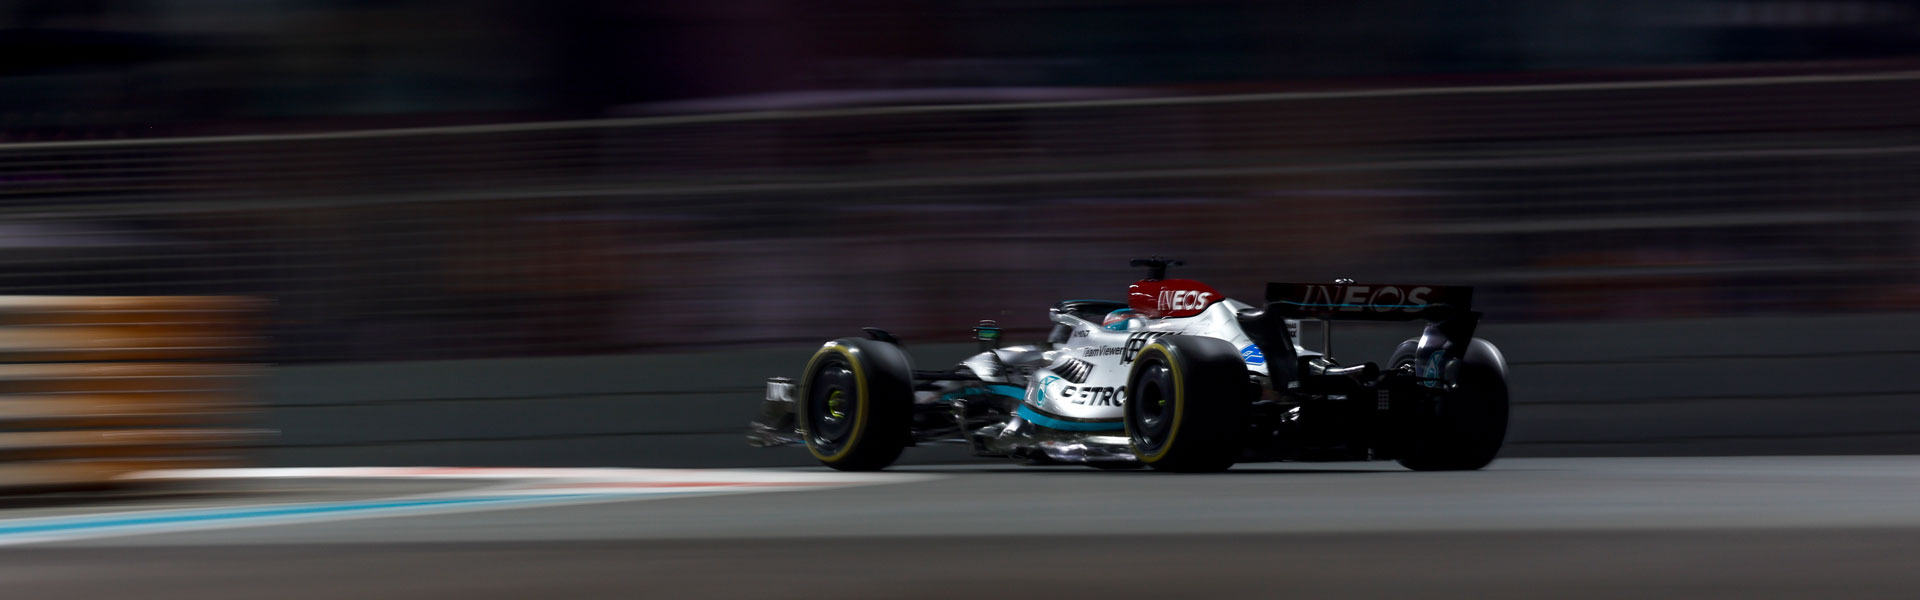 It’s P5 for Russell and a DNF for Hamilton at the Abu Dhabi GP